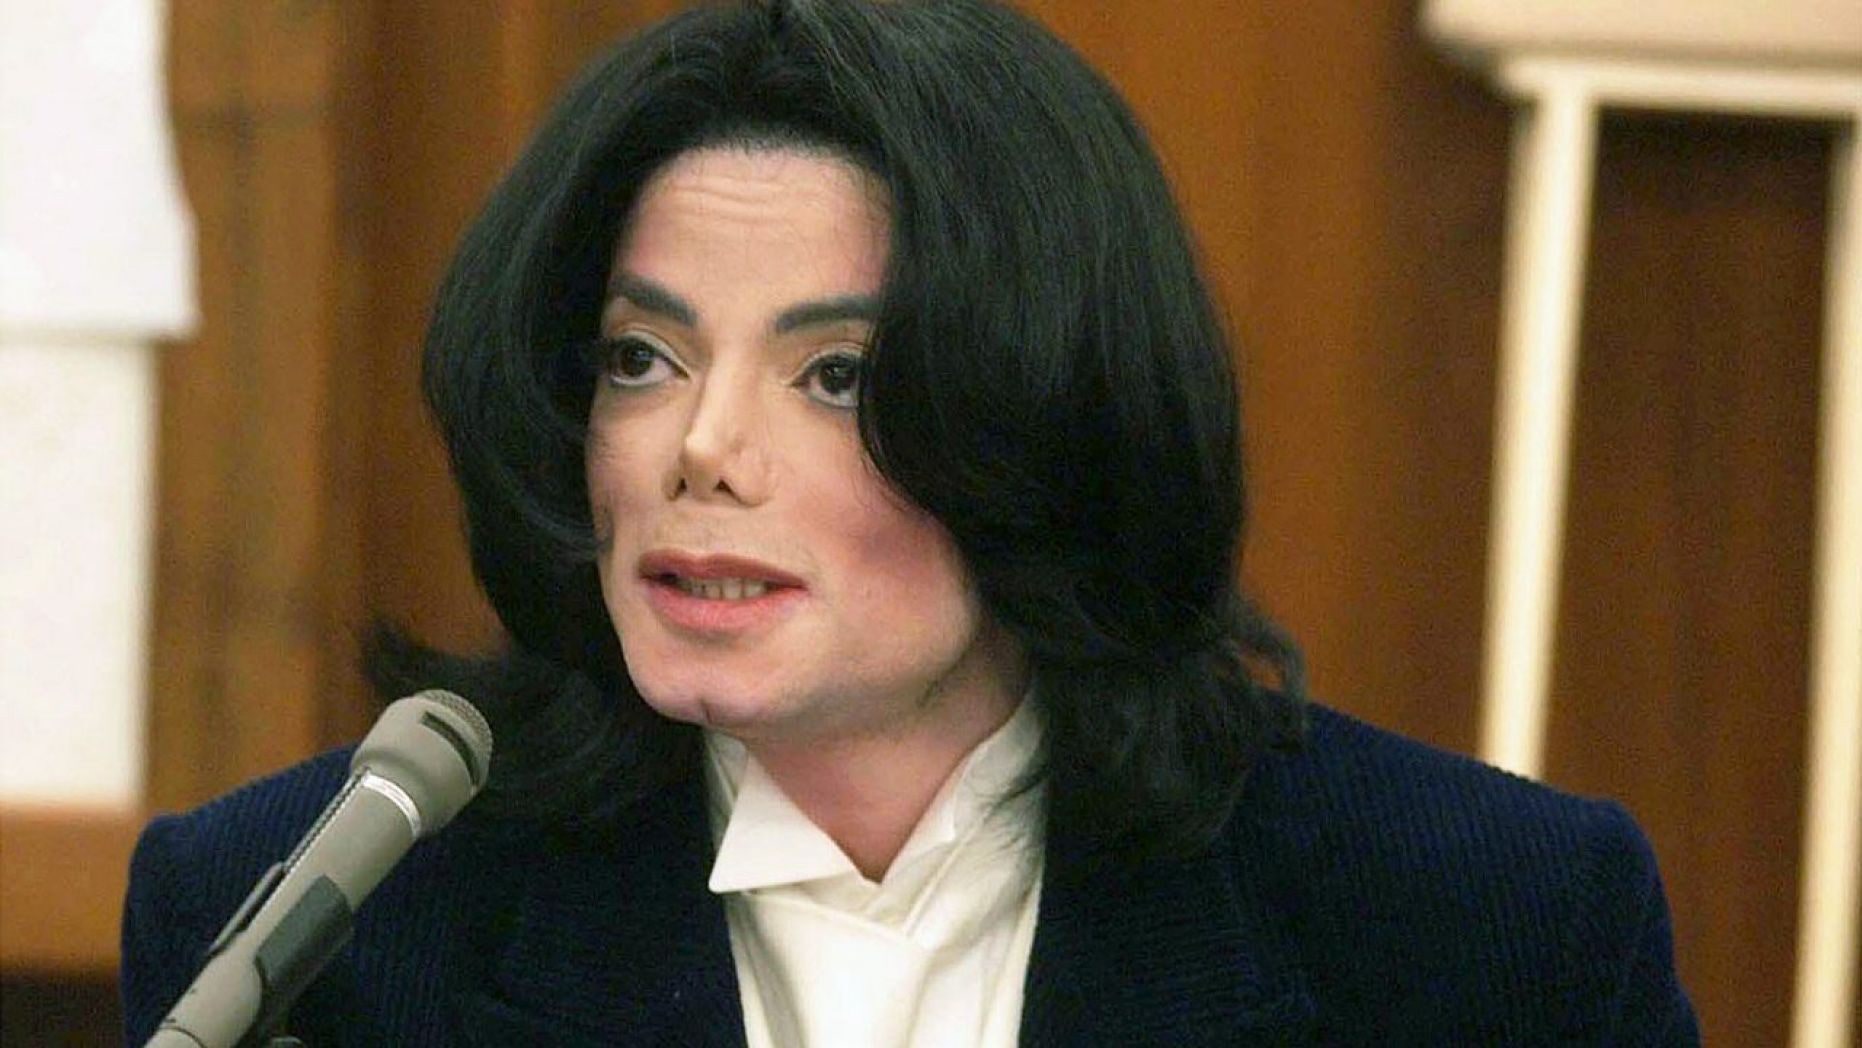 Judge dismisses lawsuit of Michael Jackson sexual abuse accuser who starred in 'Leaving Neverland' doc - Fox News